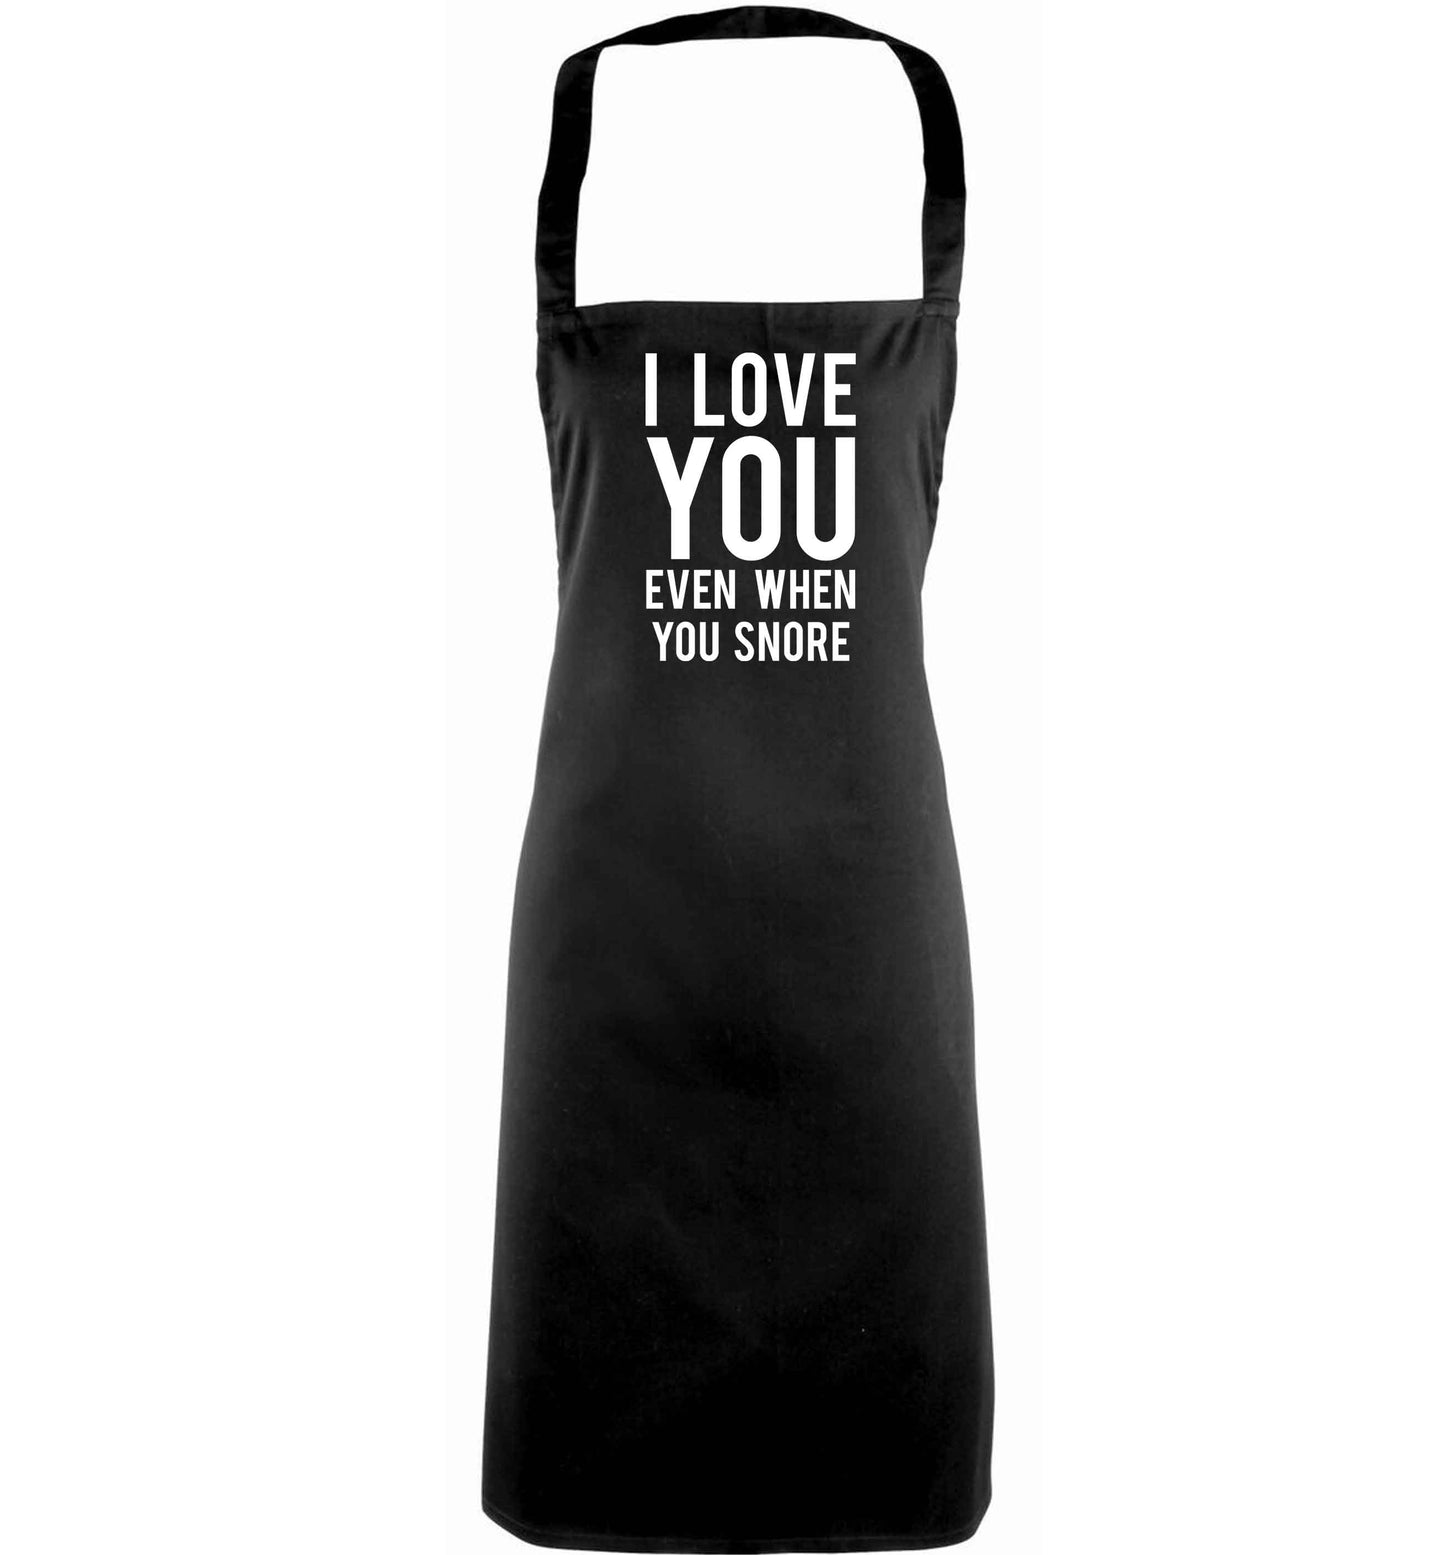 I love you even when you snore adults black apron